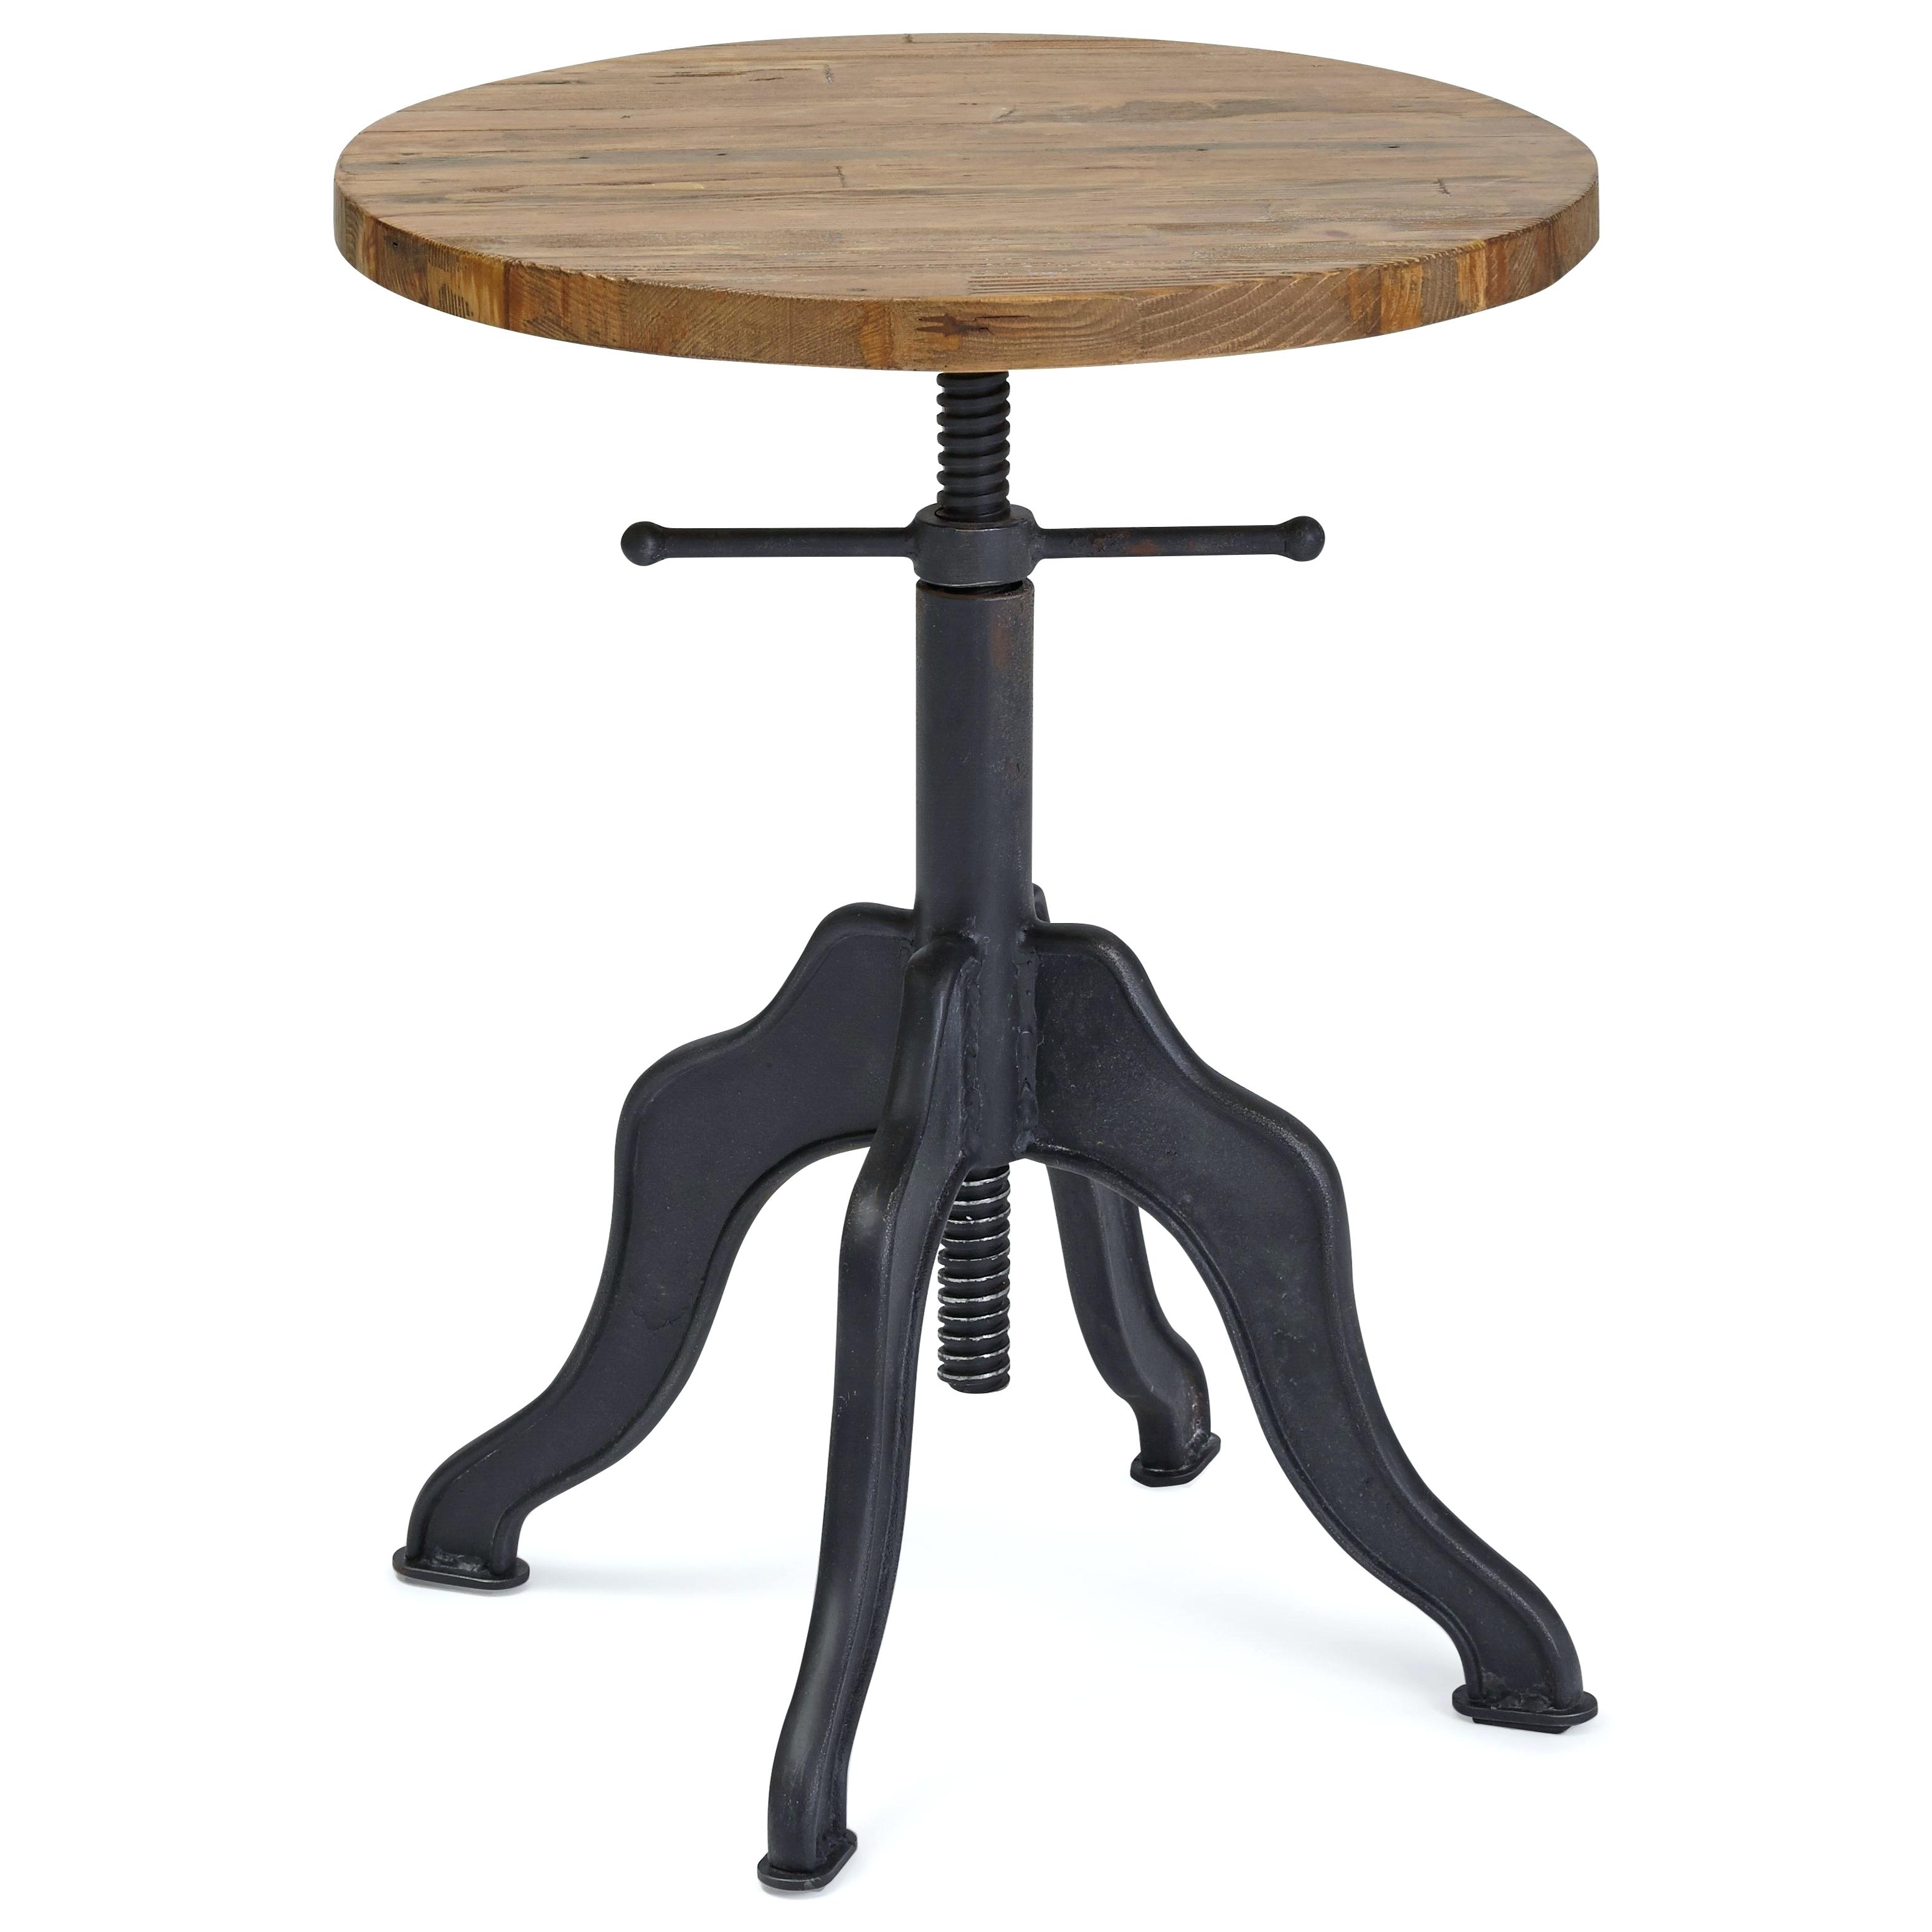 wood and metal accent table tronixs progressive furniture industrial style round adjustable target black glass side bunnings chairs tables large grey lamp fold lovell dark dining